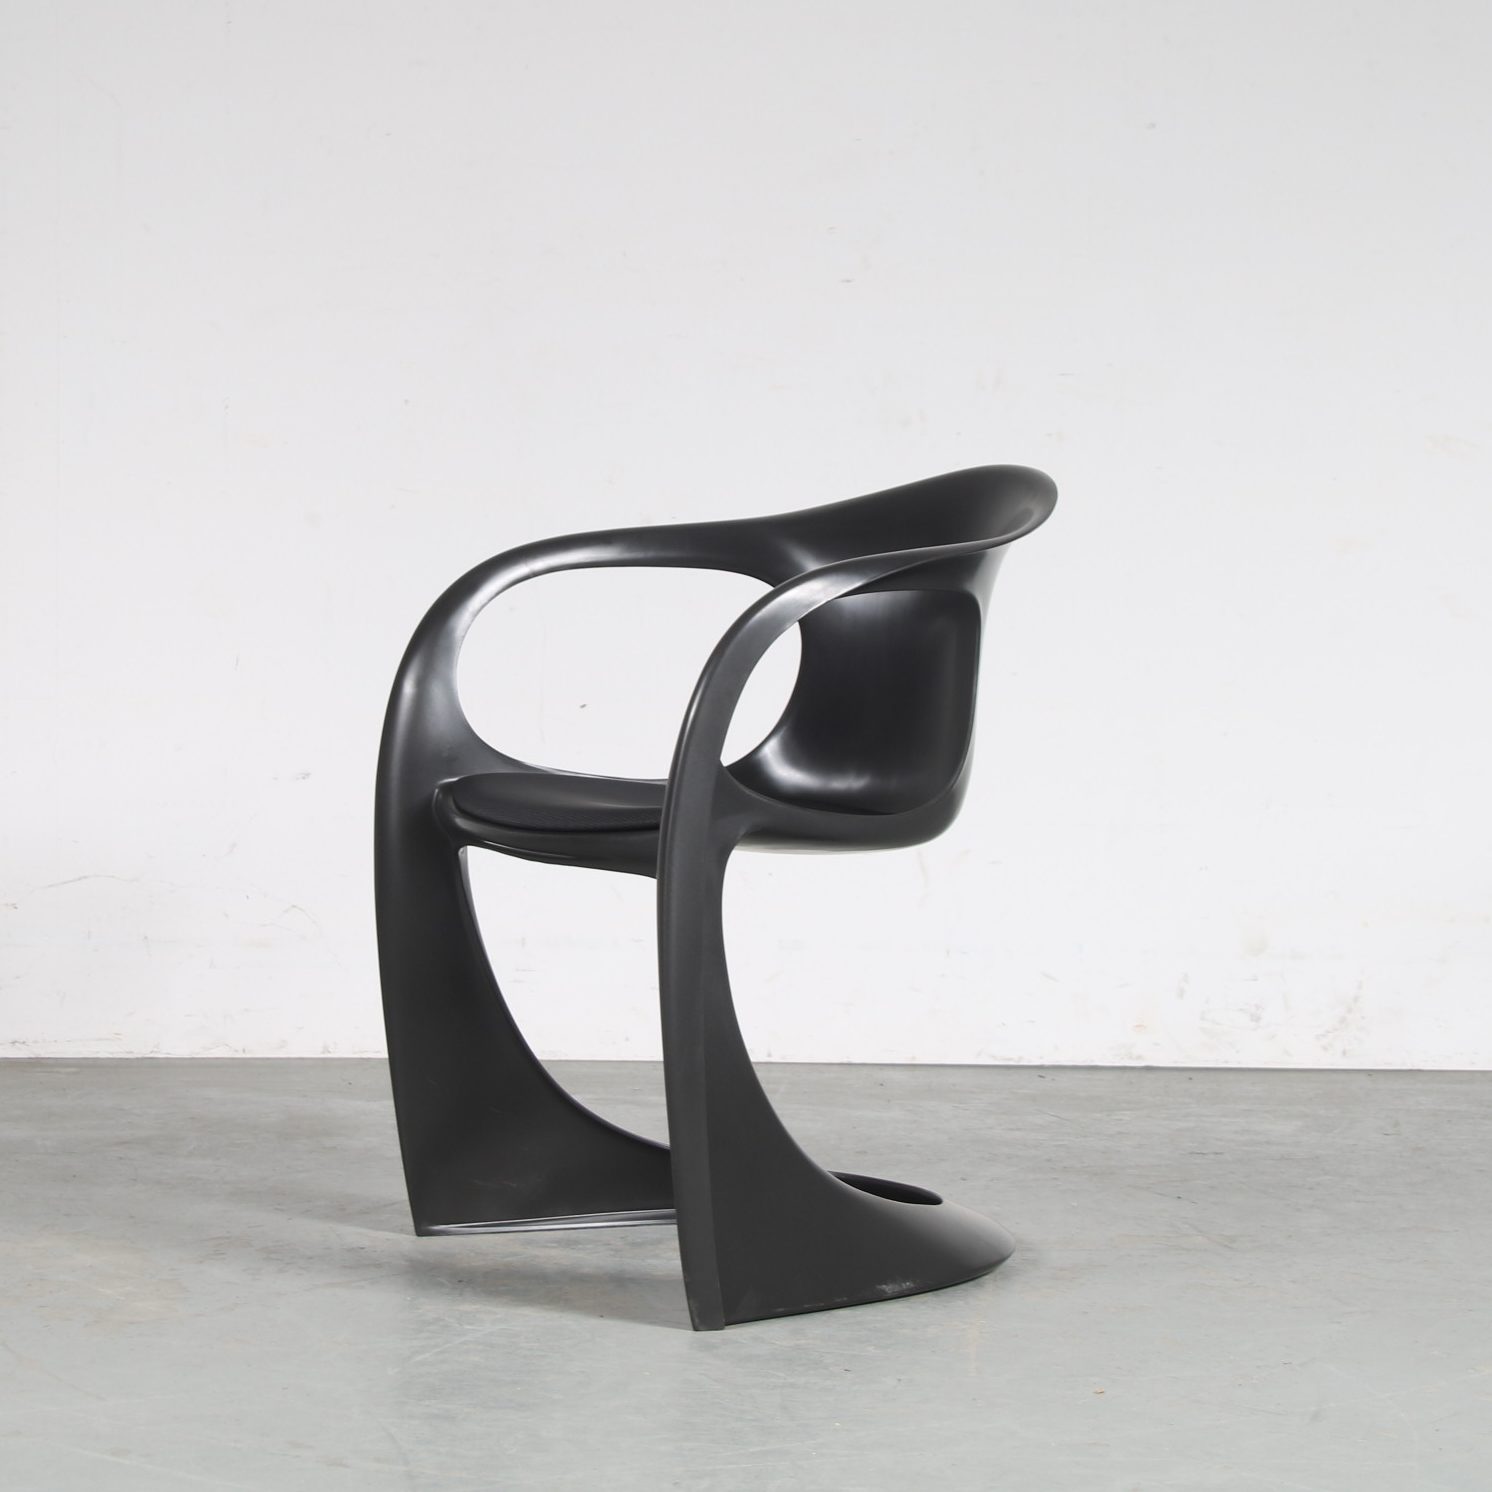 m25966-7 2000s Black plastic "Casalino" chair with armrests and black pillow (1970s design) Alexander Begge Casala, Germany